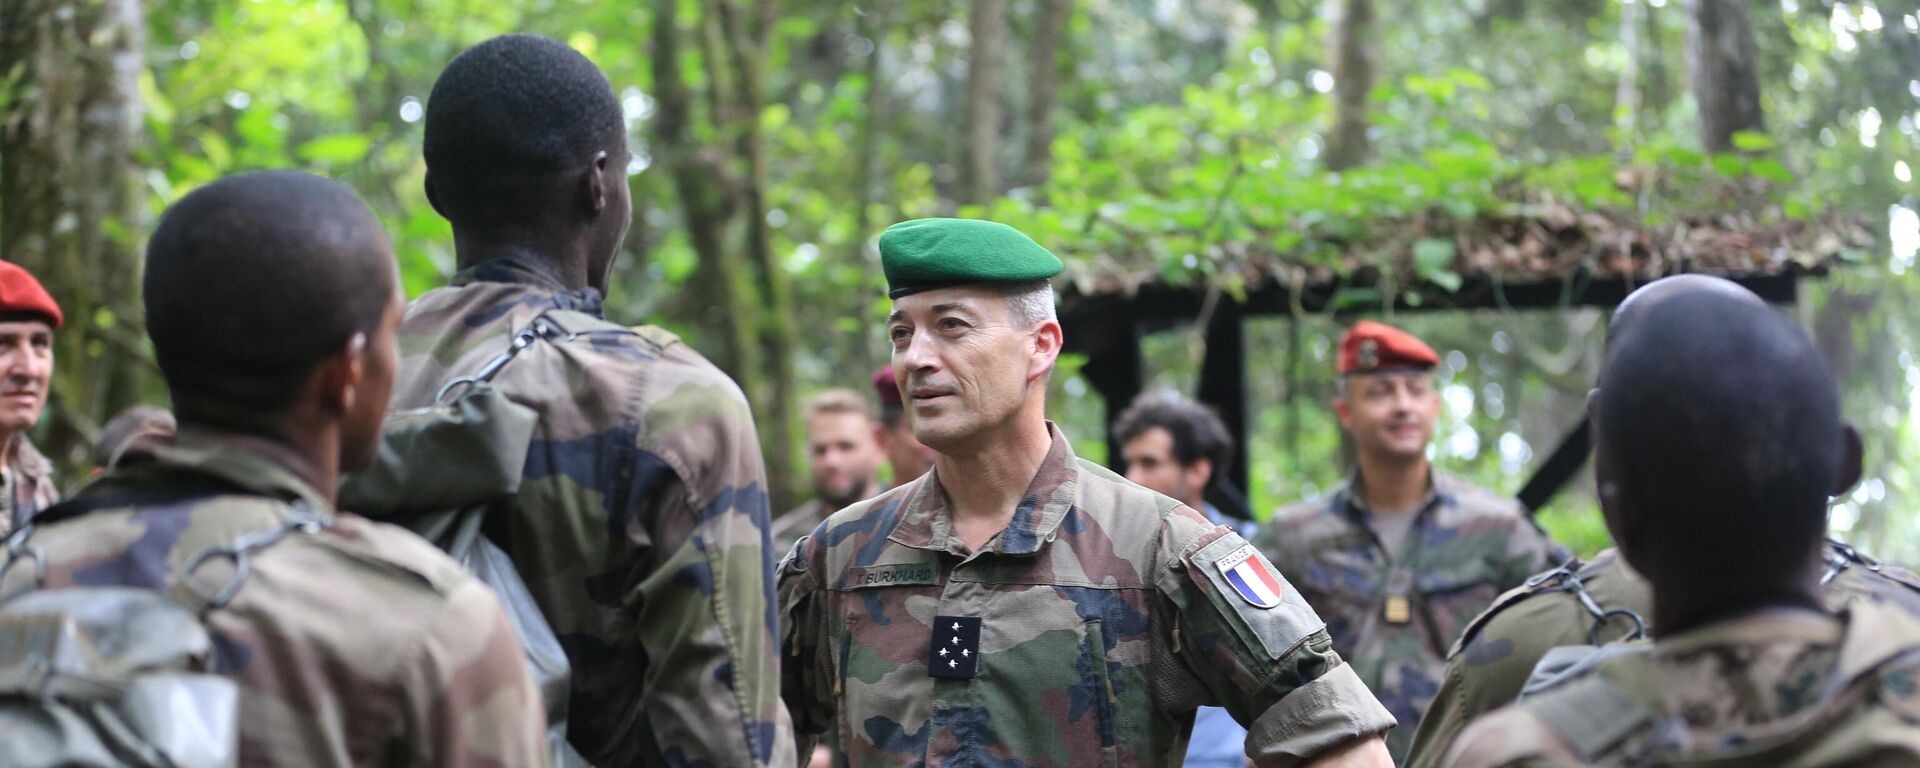 General Thierry Burkhard, French Army Chief of the Defence Staff, talks on April 15, 2022 to a group of soldiers from Cameroon, Chad, Gabon, Democratic republic of Congo, Republic of Congo and Central African Republic taking part in a training at the Raponda Walker Arboretum forest in Akanda, Gabon - Sputnik International, 1920, 02.03.2023